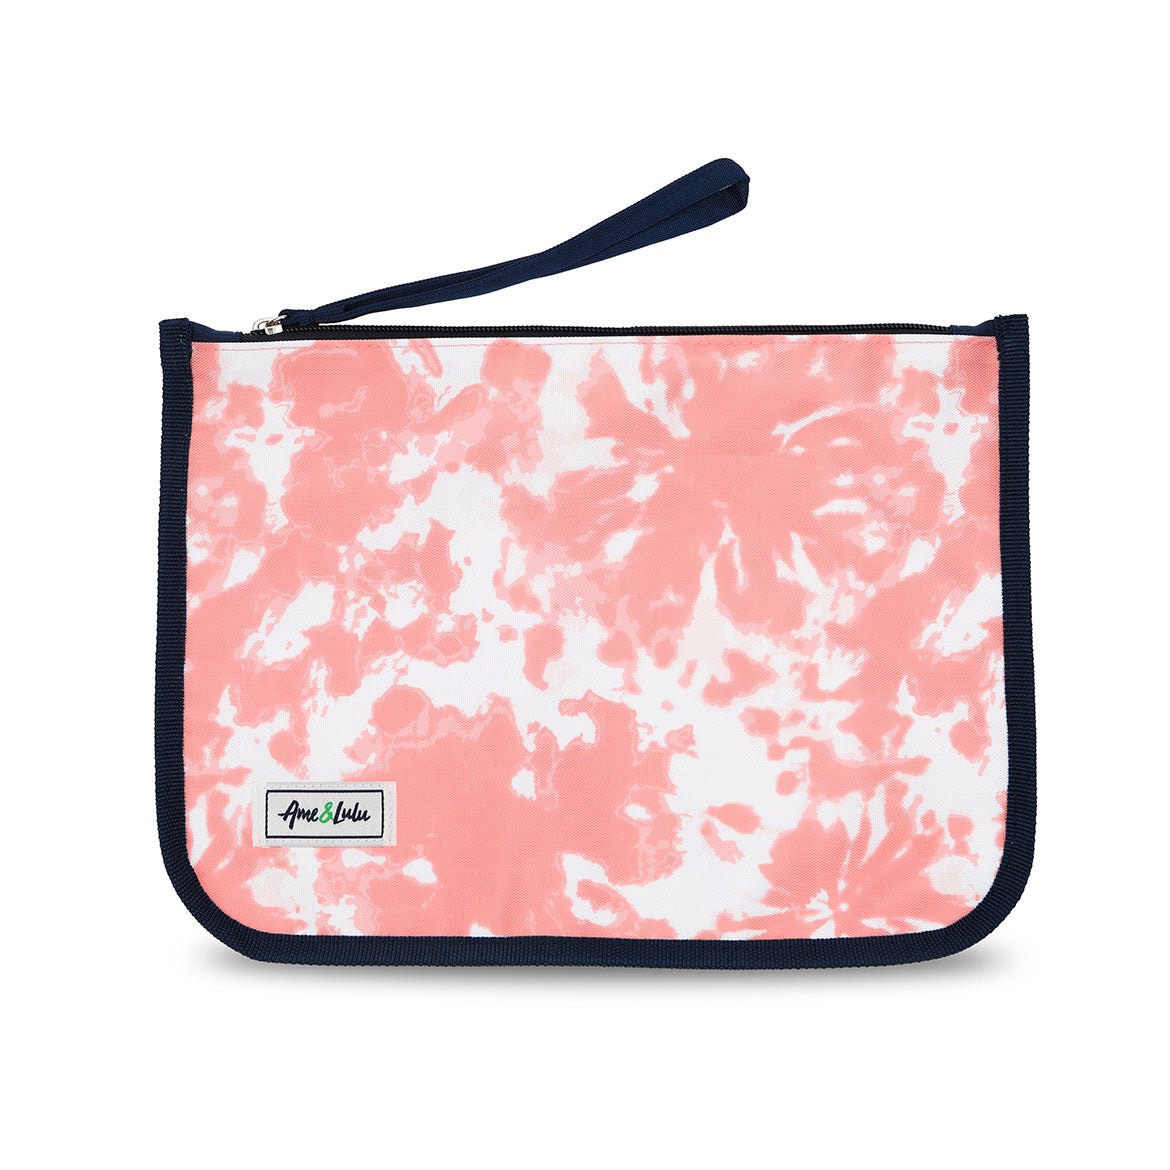 coral and white tie dye nylon zip pouch with wrist strap